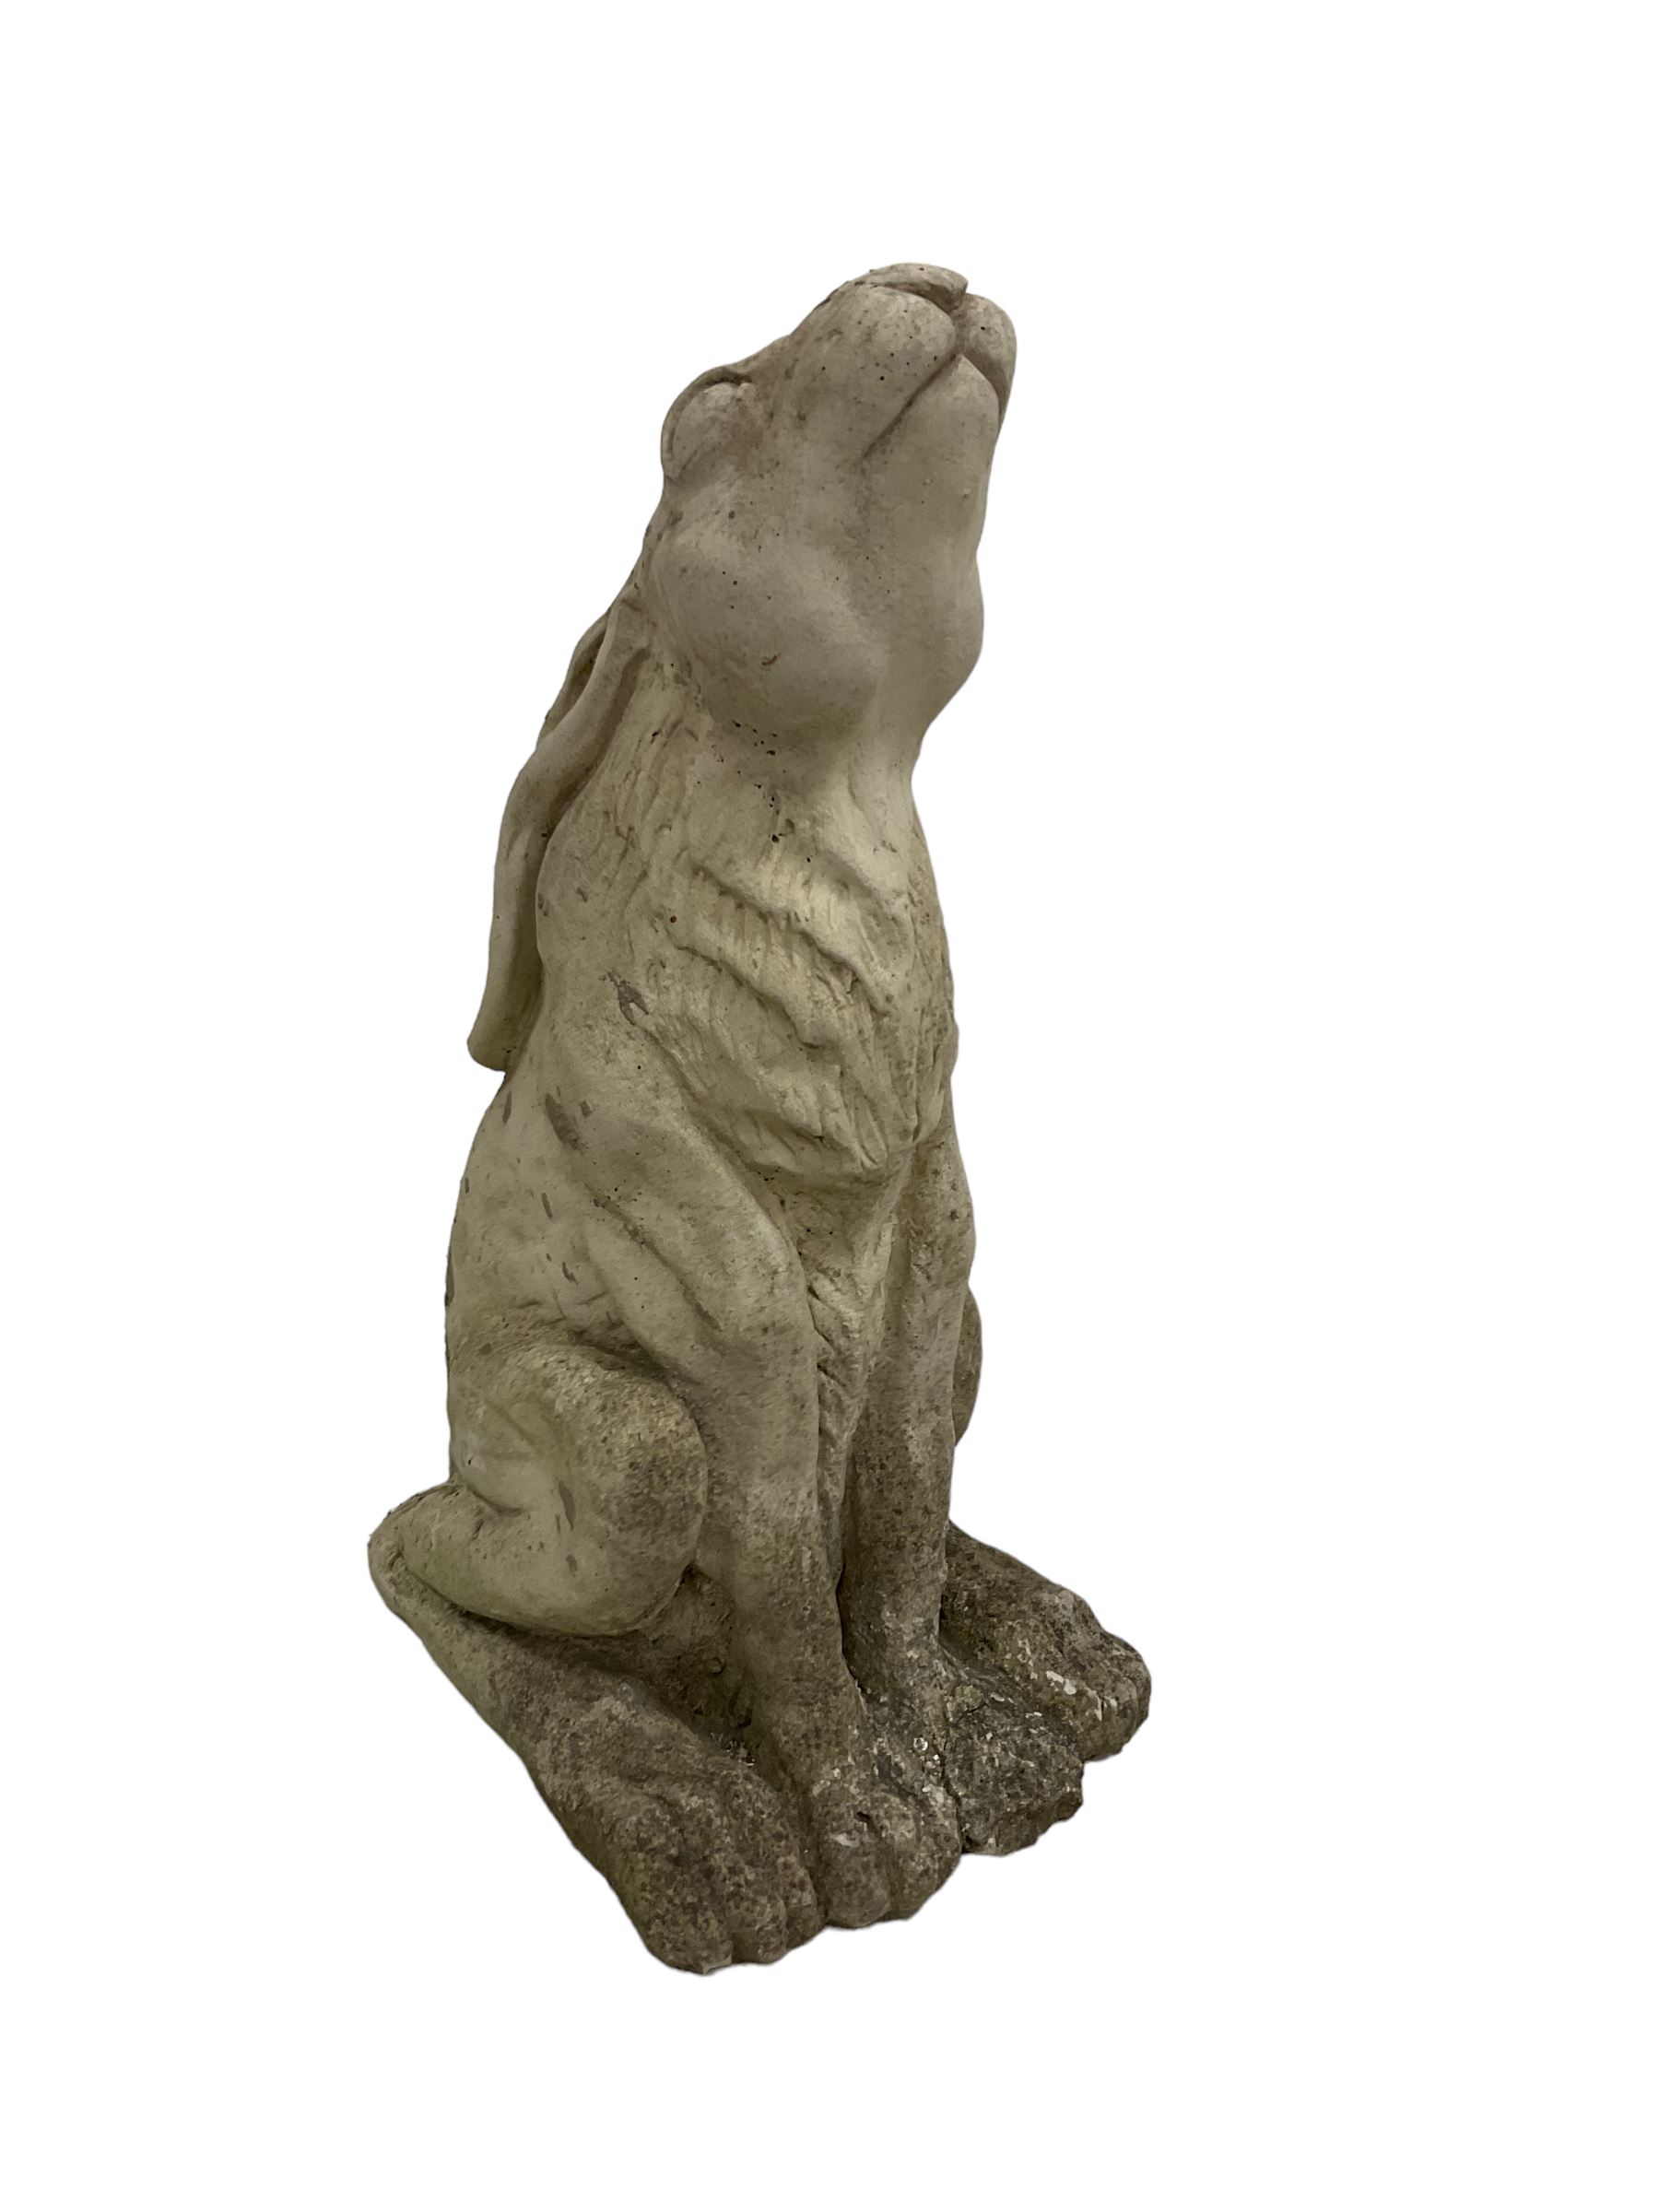 Composite stone garden statue of a moon-gazing hare - Image 3 of 4